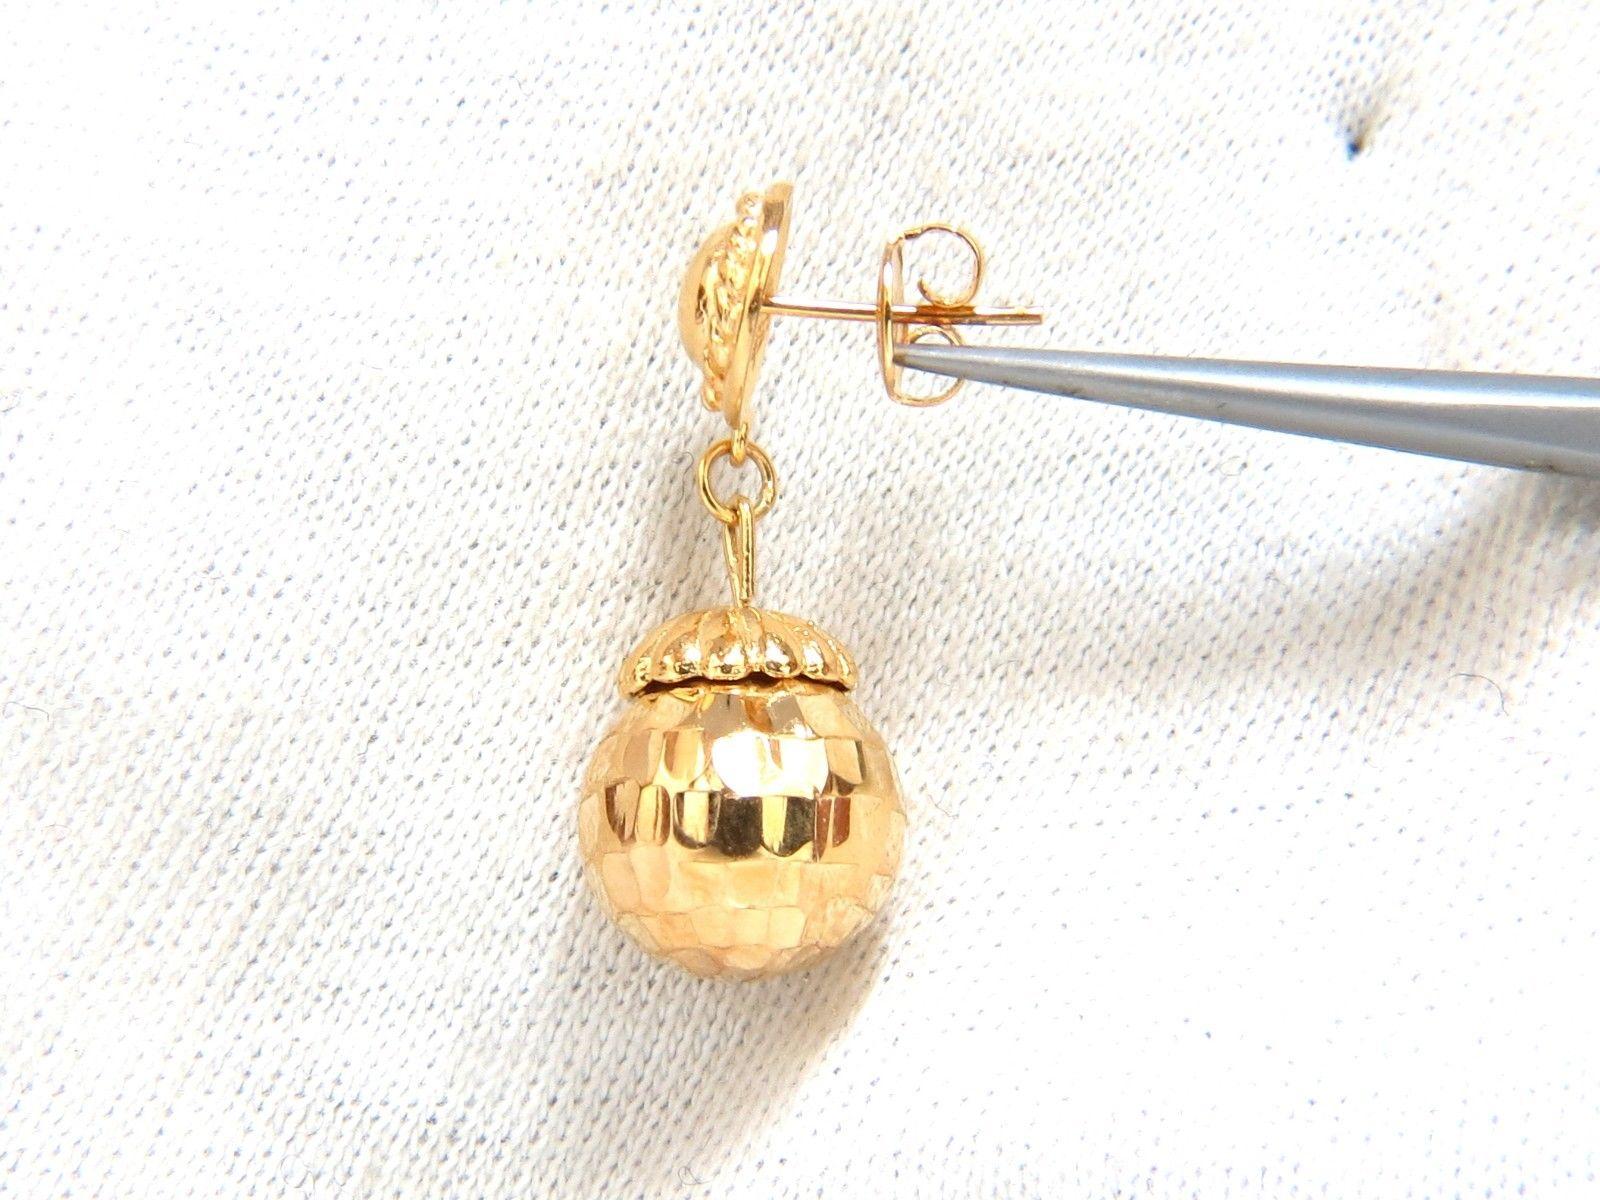 Measurements of Earrings:Faceted Dangle Ball Earrings

12mm diameter ball

9mm circular top

29mm long

Comfortable Butterfly Pushbacks

6 grams / 18kt. Yellow Gold

Earrings are gorgeous made